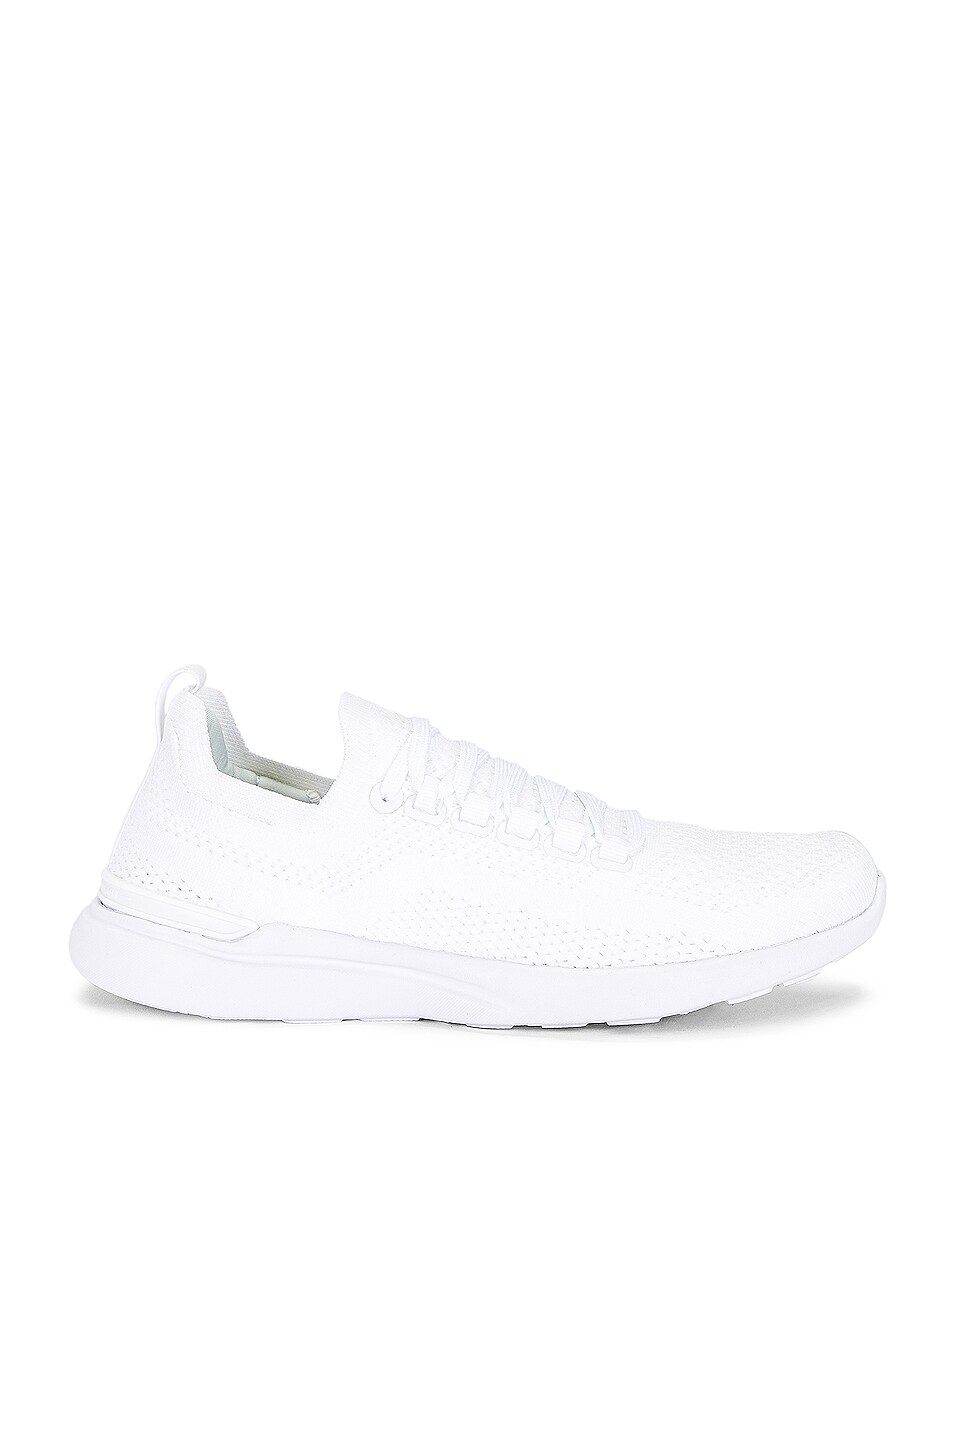 Image 1 of APL: Athletic Propulsion Labs TechLoom Breeze in White